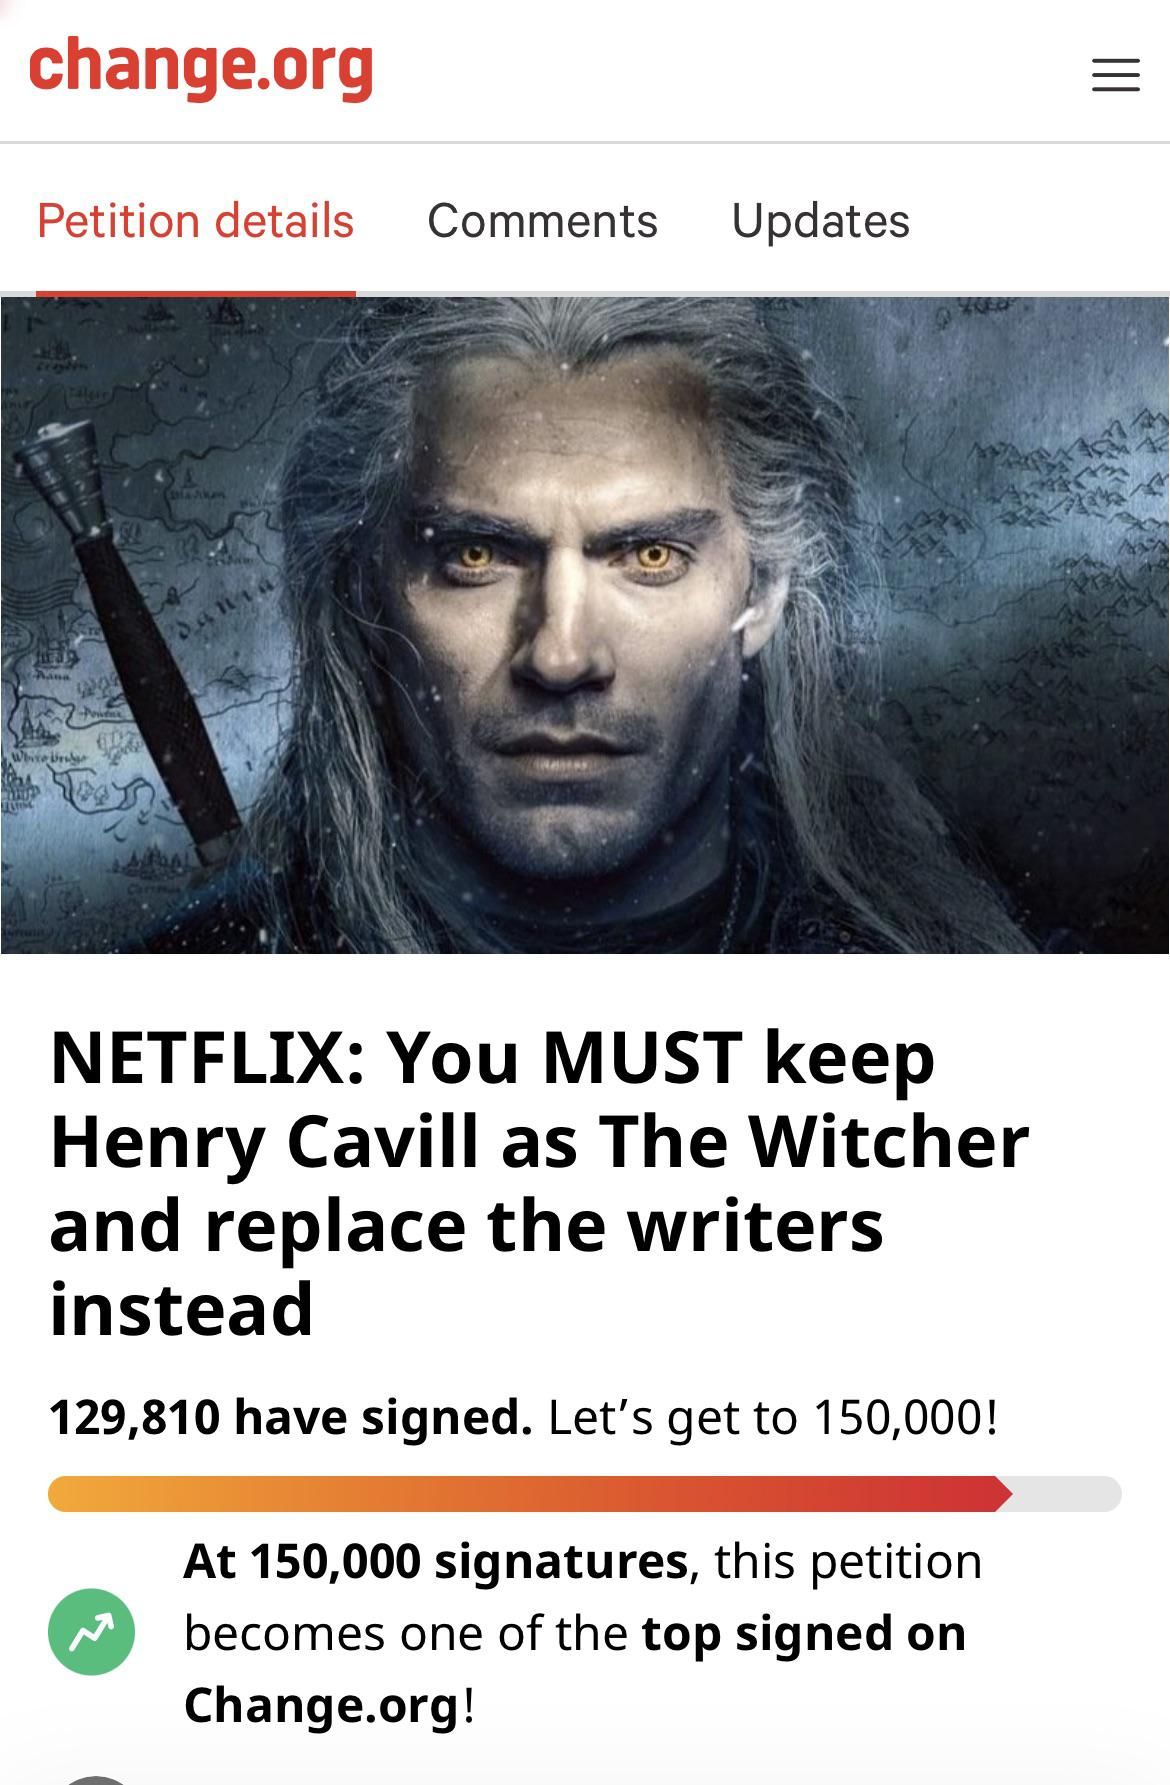 Petition to save the Witcher going strong